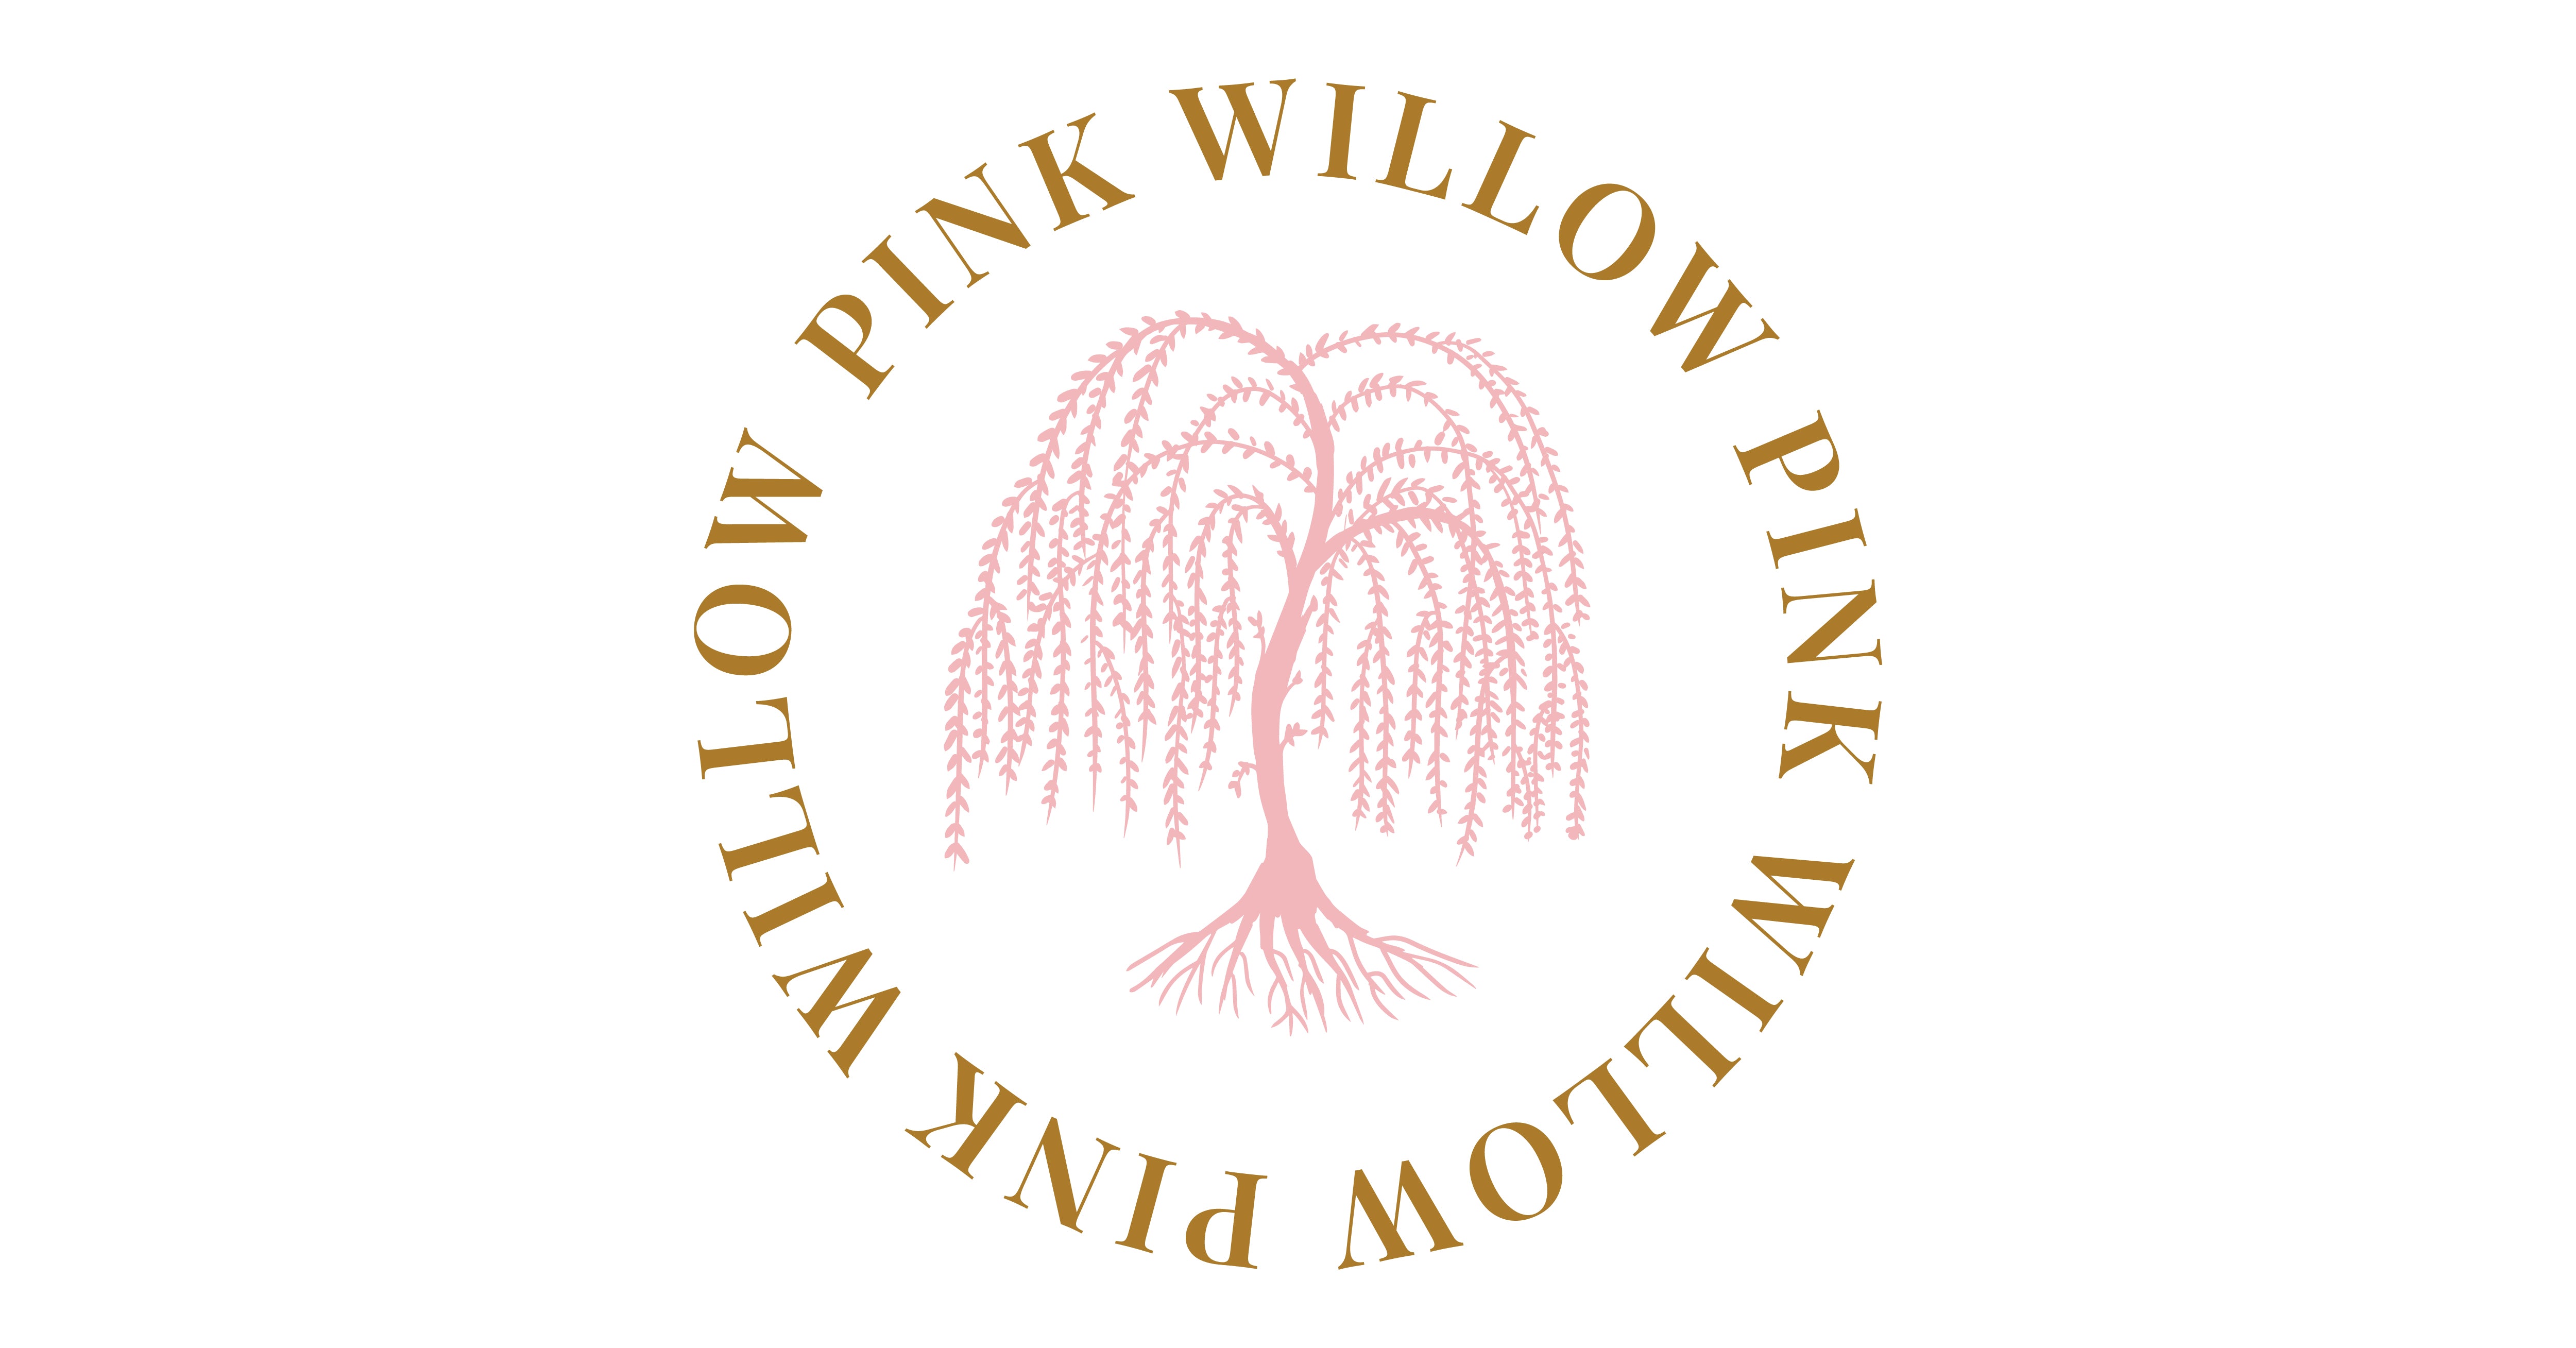 Only You Pants - Pink – Willow 31